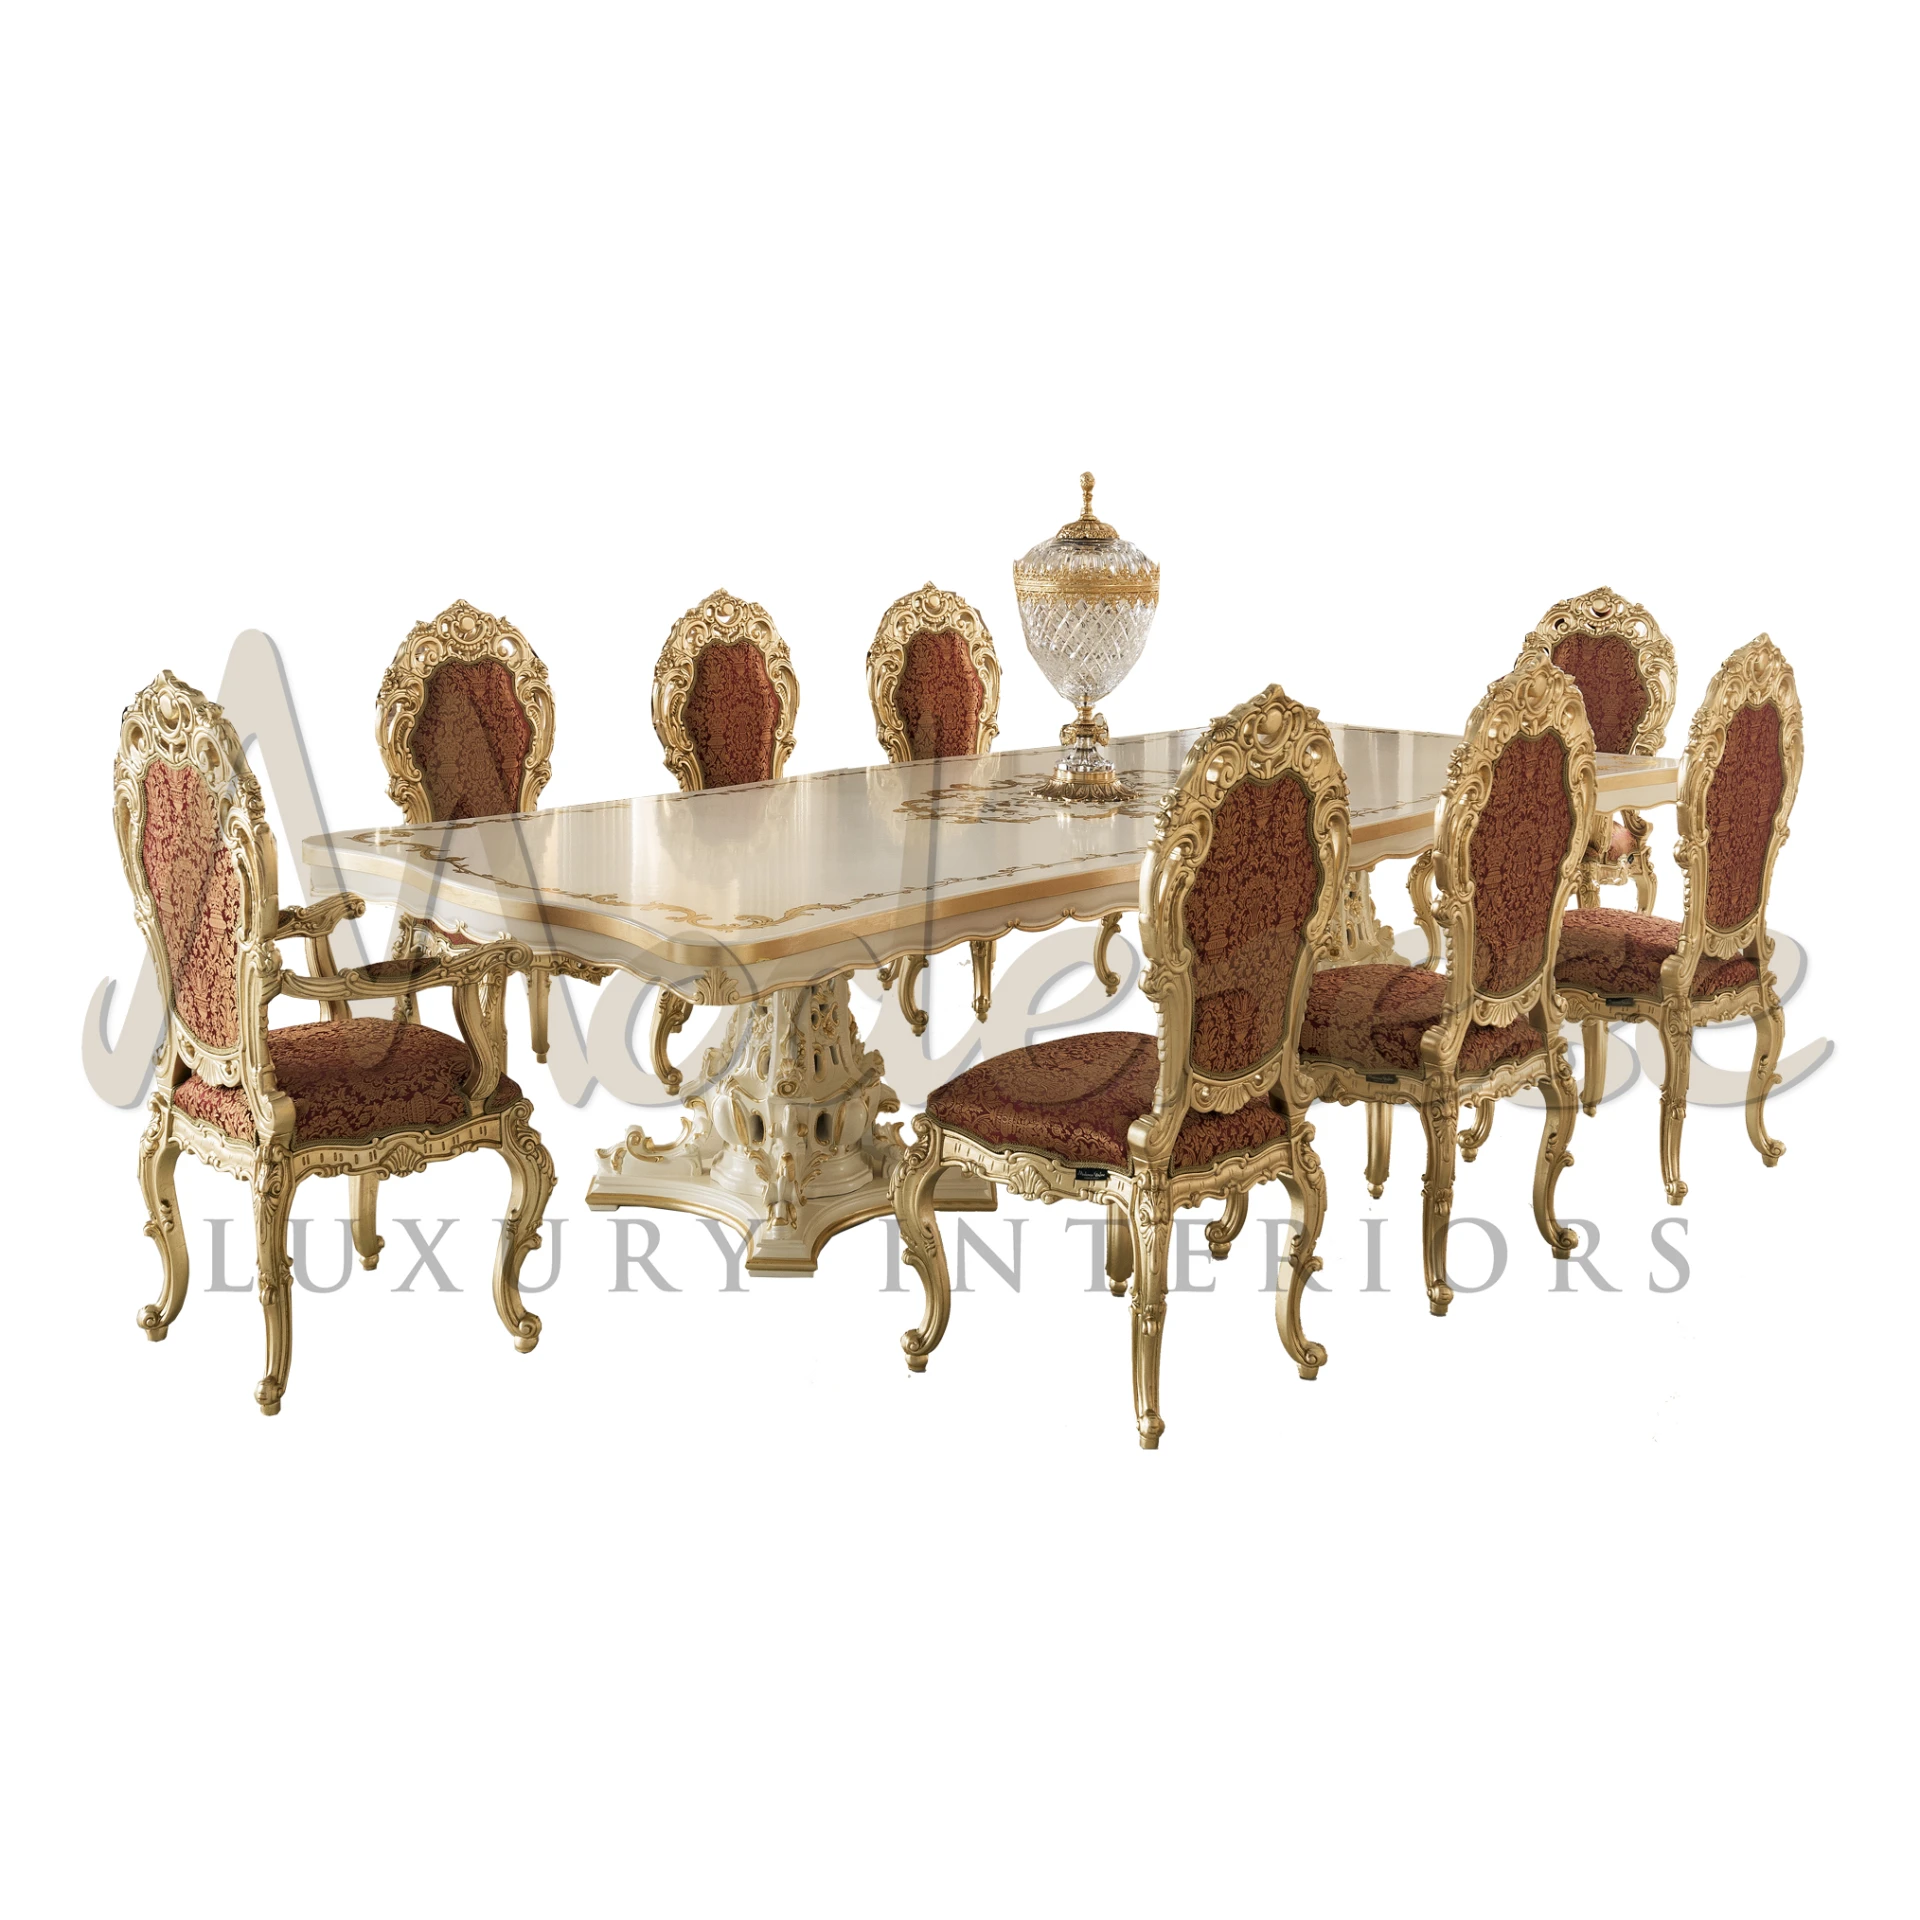 Baroque royal dining table with gold leaf finish, adding classic charm to your space.
